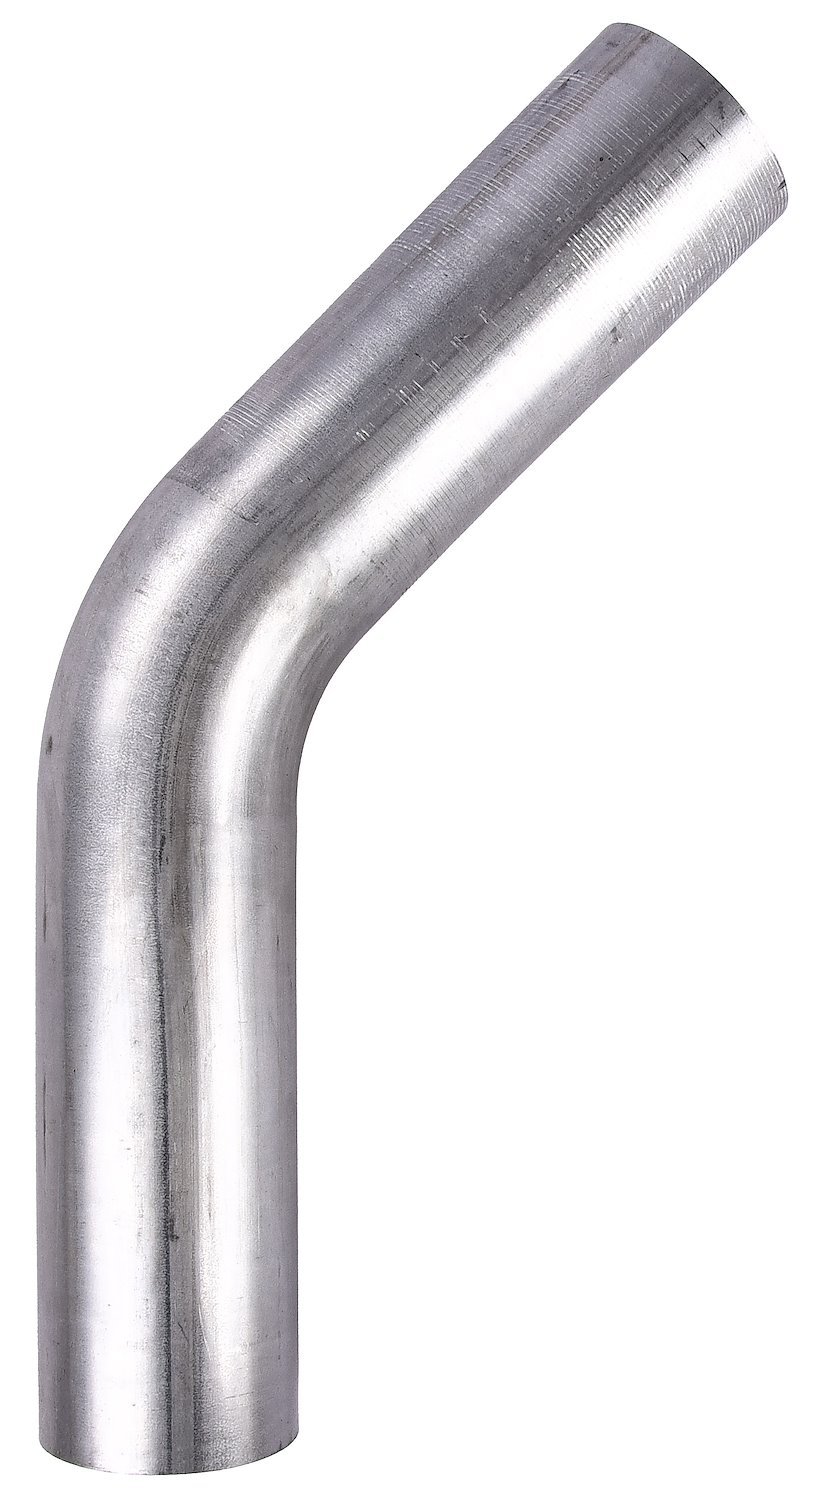 Exhaust Elbow Aluminized Steel [45-Degree Bend, 3 in. Outer Diameter]